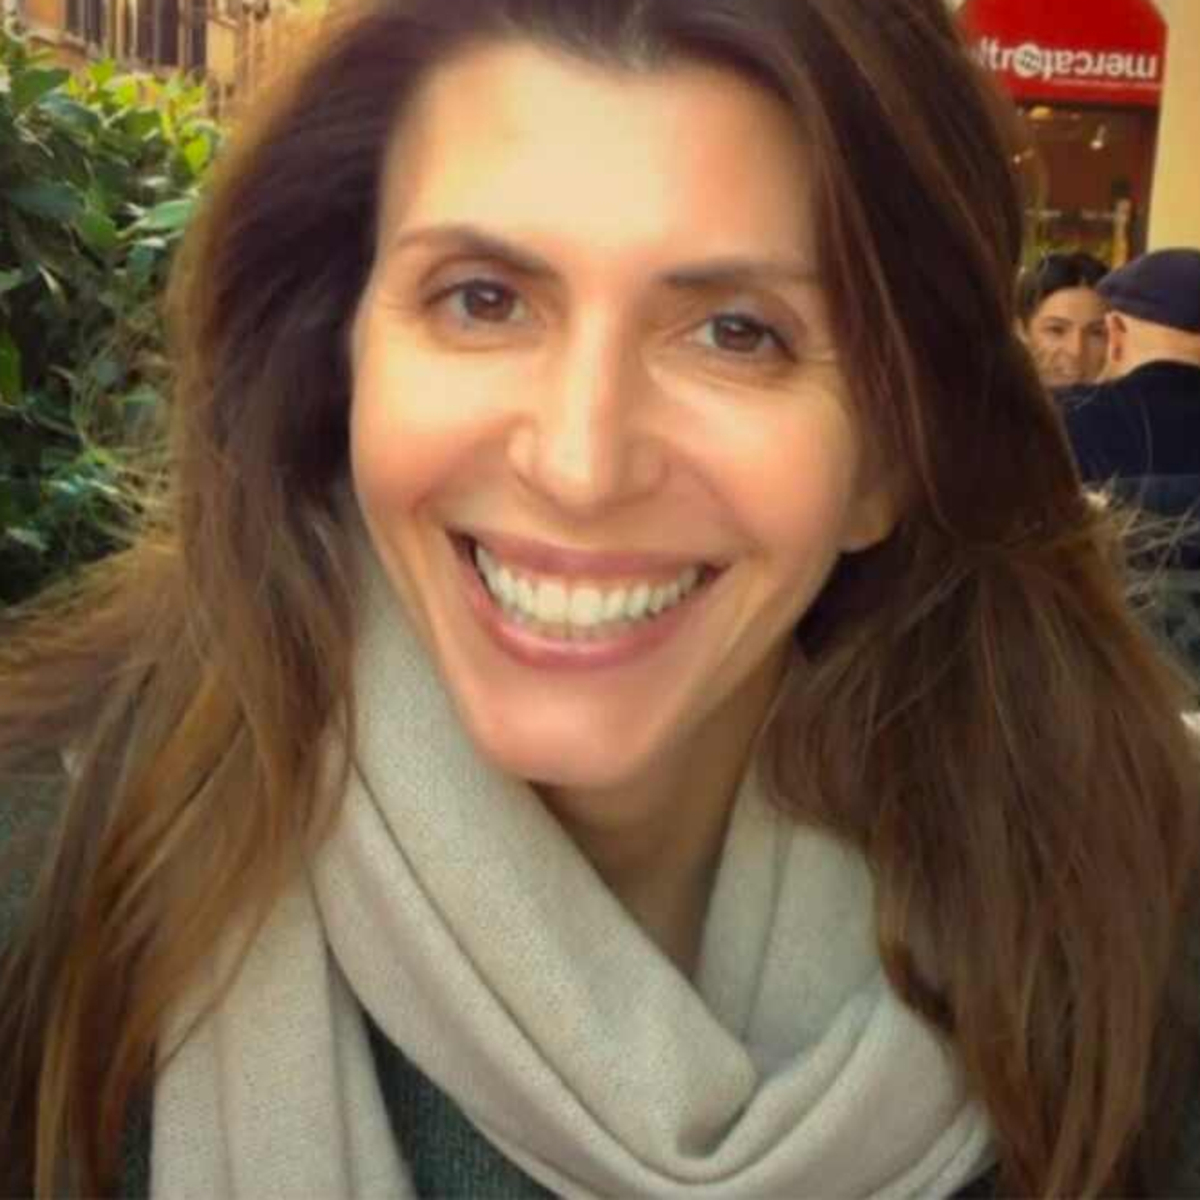 Jennifer Dulos Family And Parents Net Worth: Who Are They?